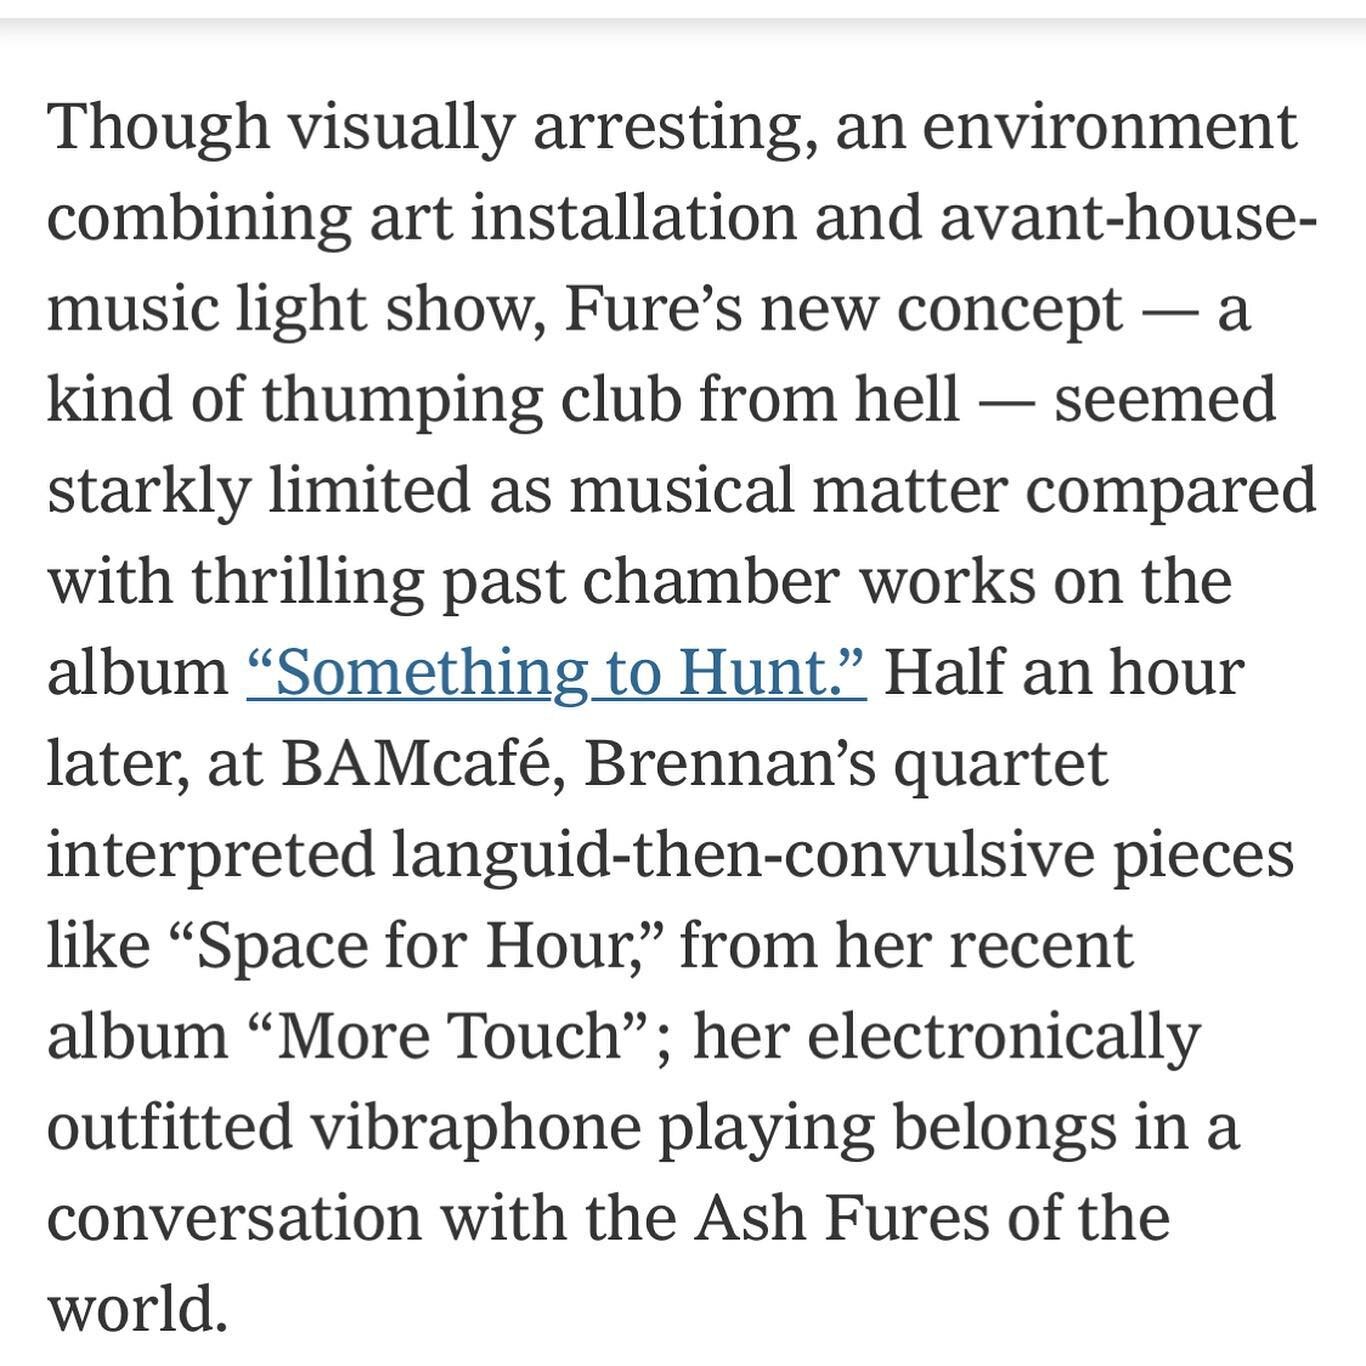 Thank you so much for the mention @nytimes and Seth Colter Walls! 🙏 
.
.
.
.
.
#tuesdayvibes #nyc #performance #show #bangonacan #longplayfestival #springvibes #patriciabrennan #quartet #electronic #music #vibes #effects #groove #percussion #rhythm 